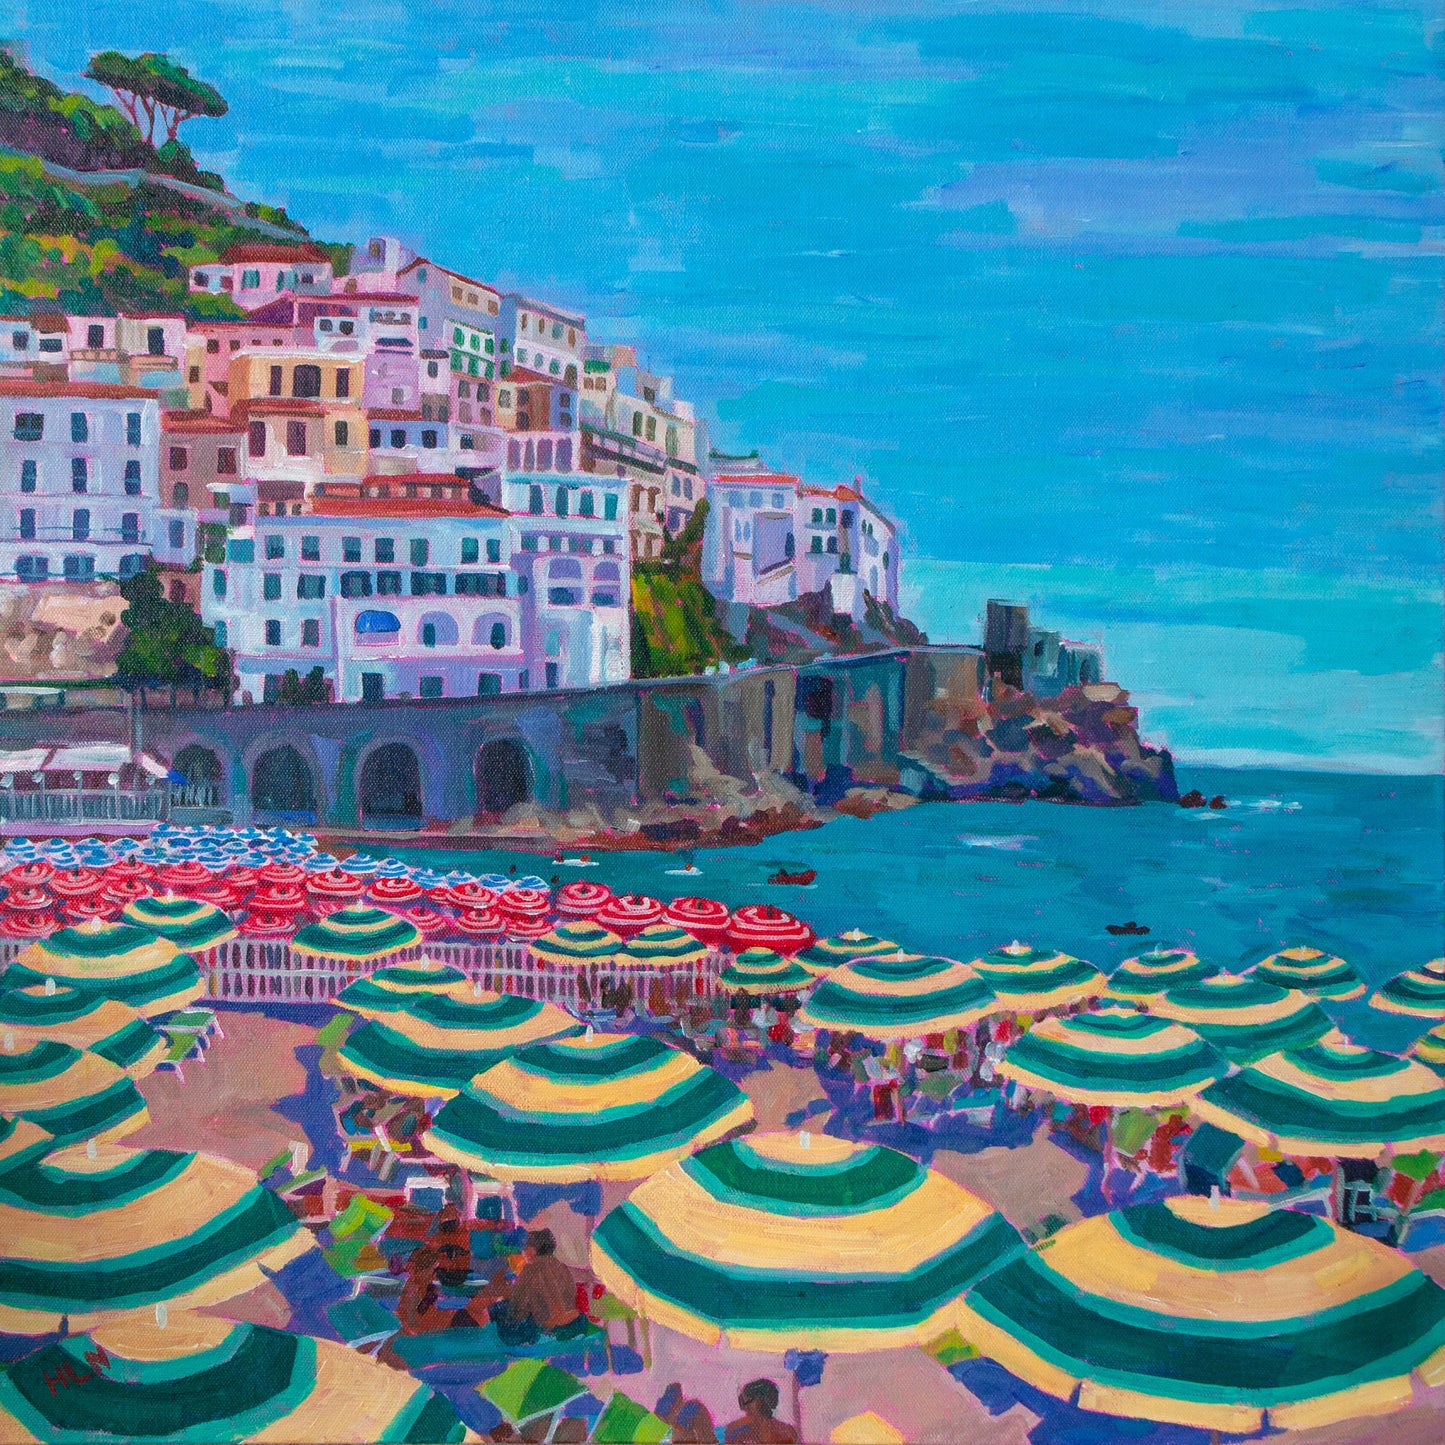 Vibrant painting of the amalfi coast with hillside town and beach umbrellas